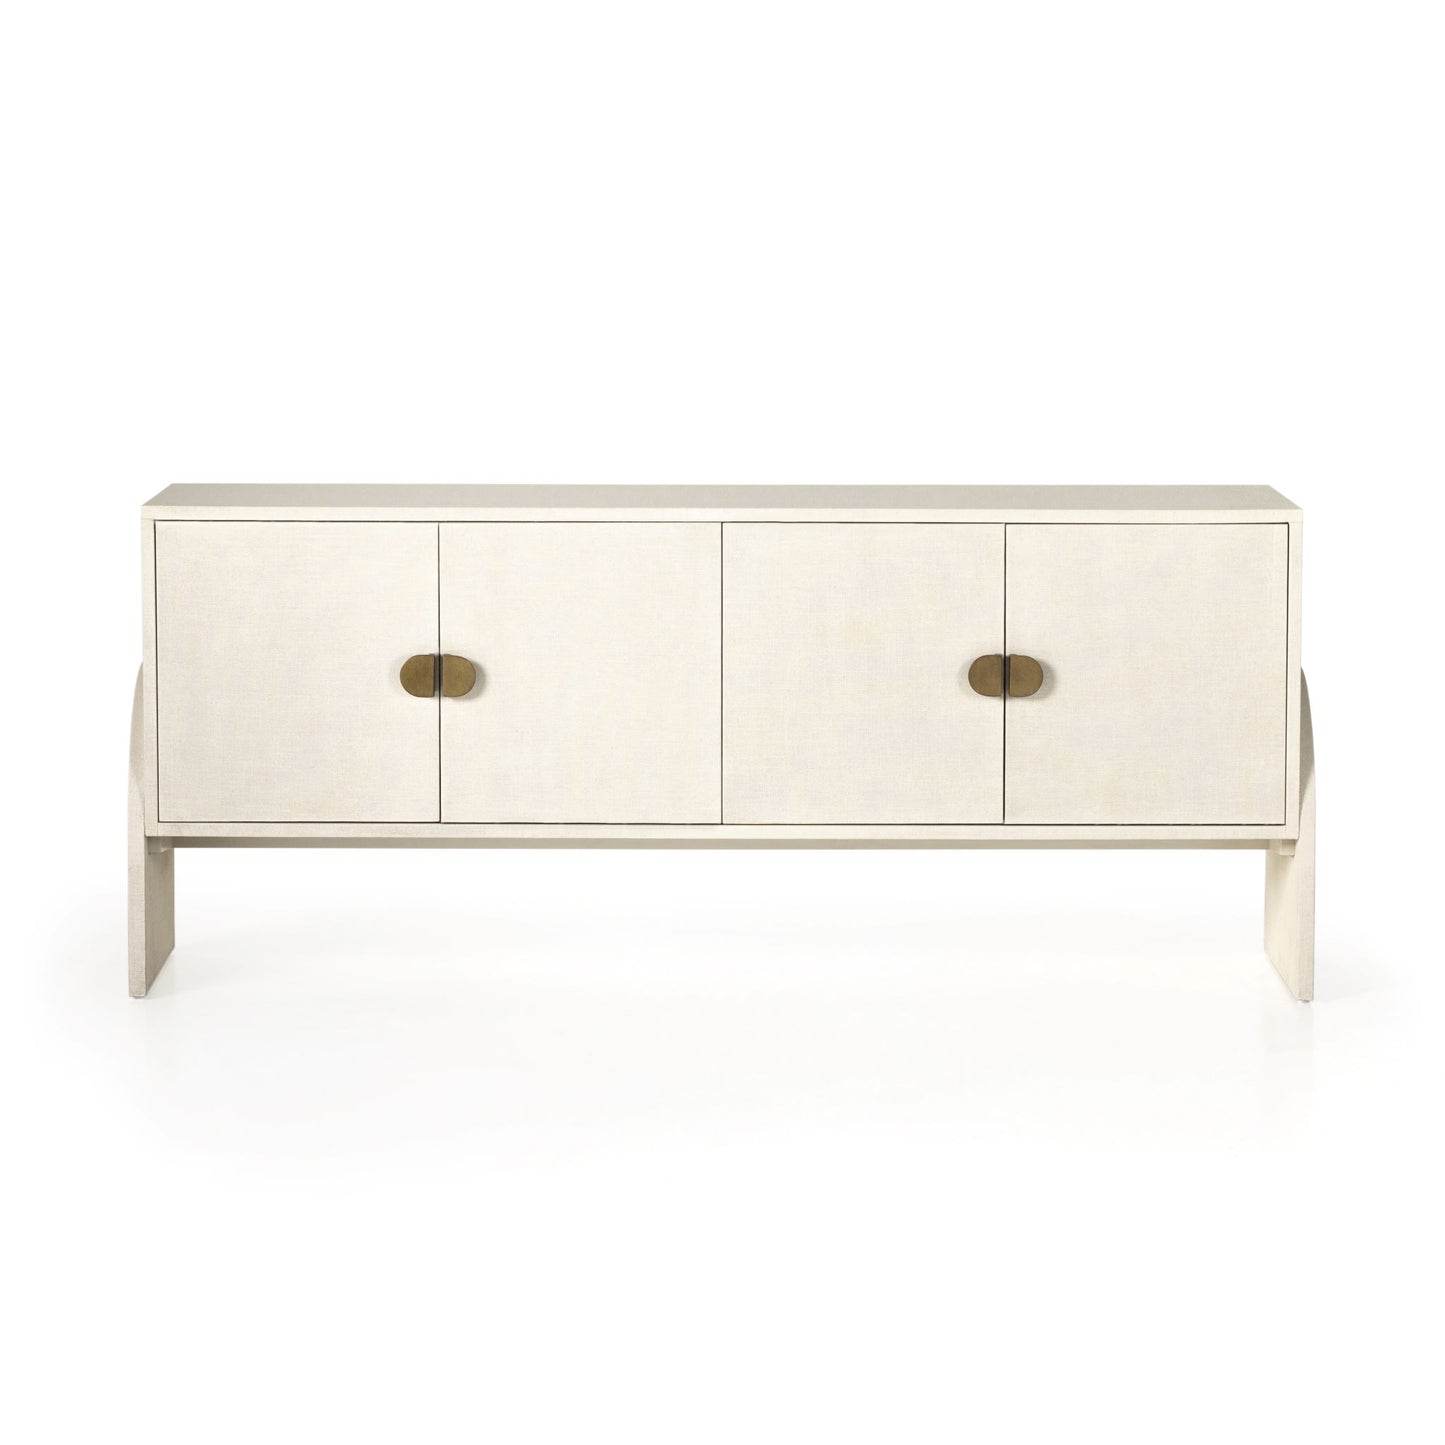 Cressida Sideboard-Ivory Painted Linen Buffets & Sideboards Four Hands     Four Hands, Mid Century Modern Furniture, Old Bones Furniture Company, Old Bones Co, Modern Mid Century, Designer Furniture, https://www.oldbonesco.com/